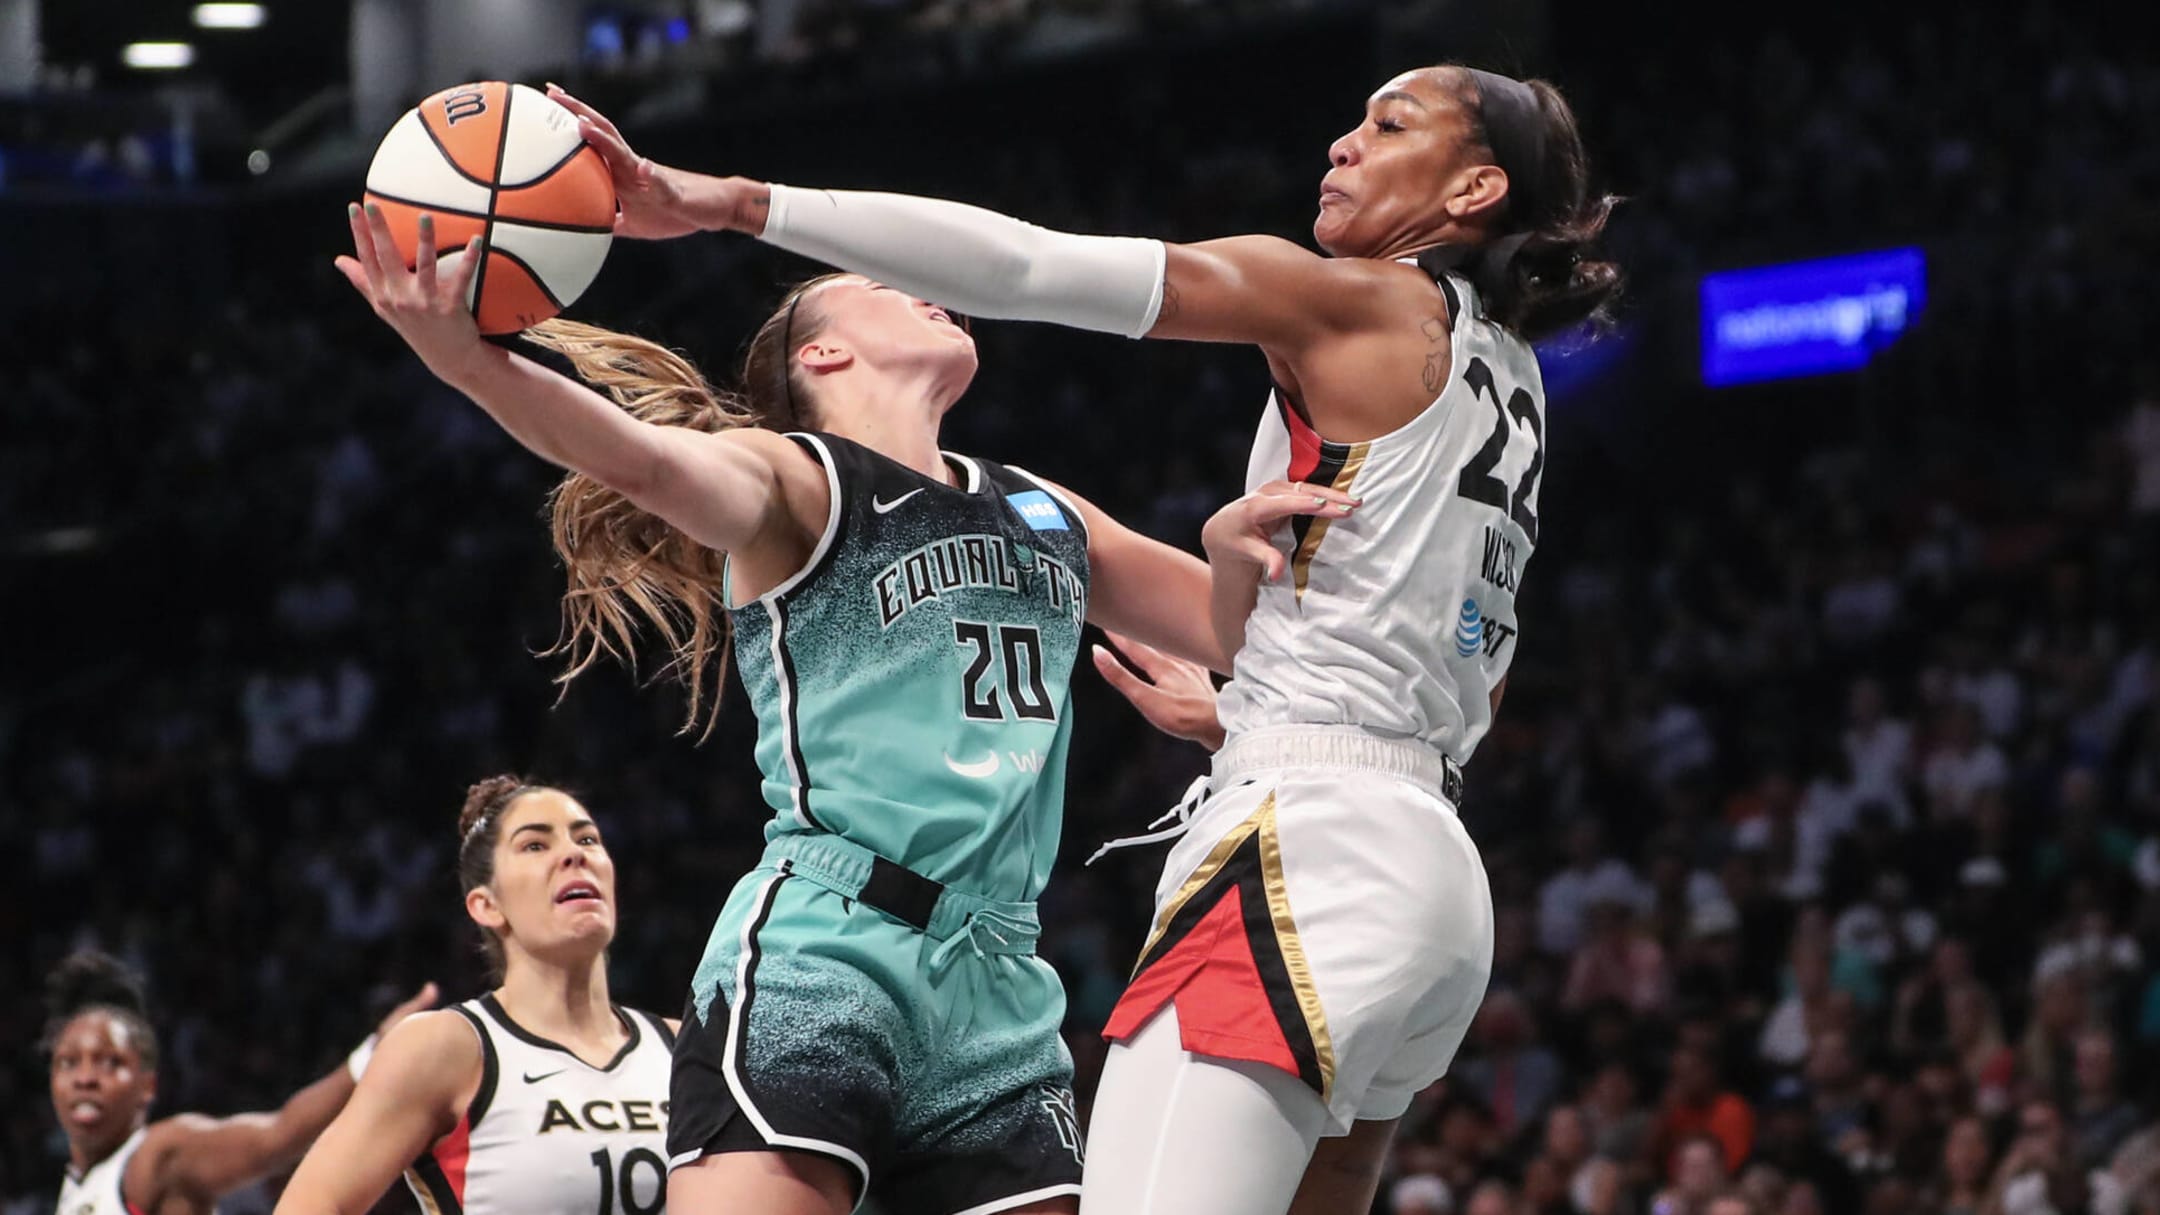 A'ja Wilson makes her case for yet another trophy in WNBA Finals